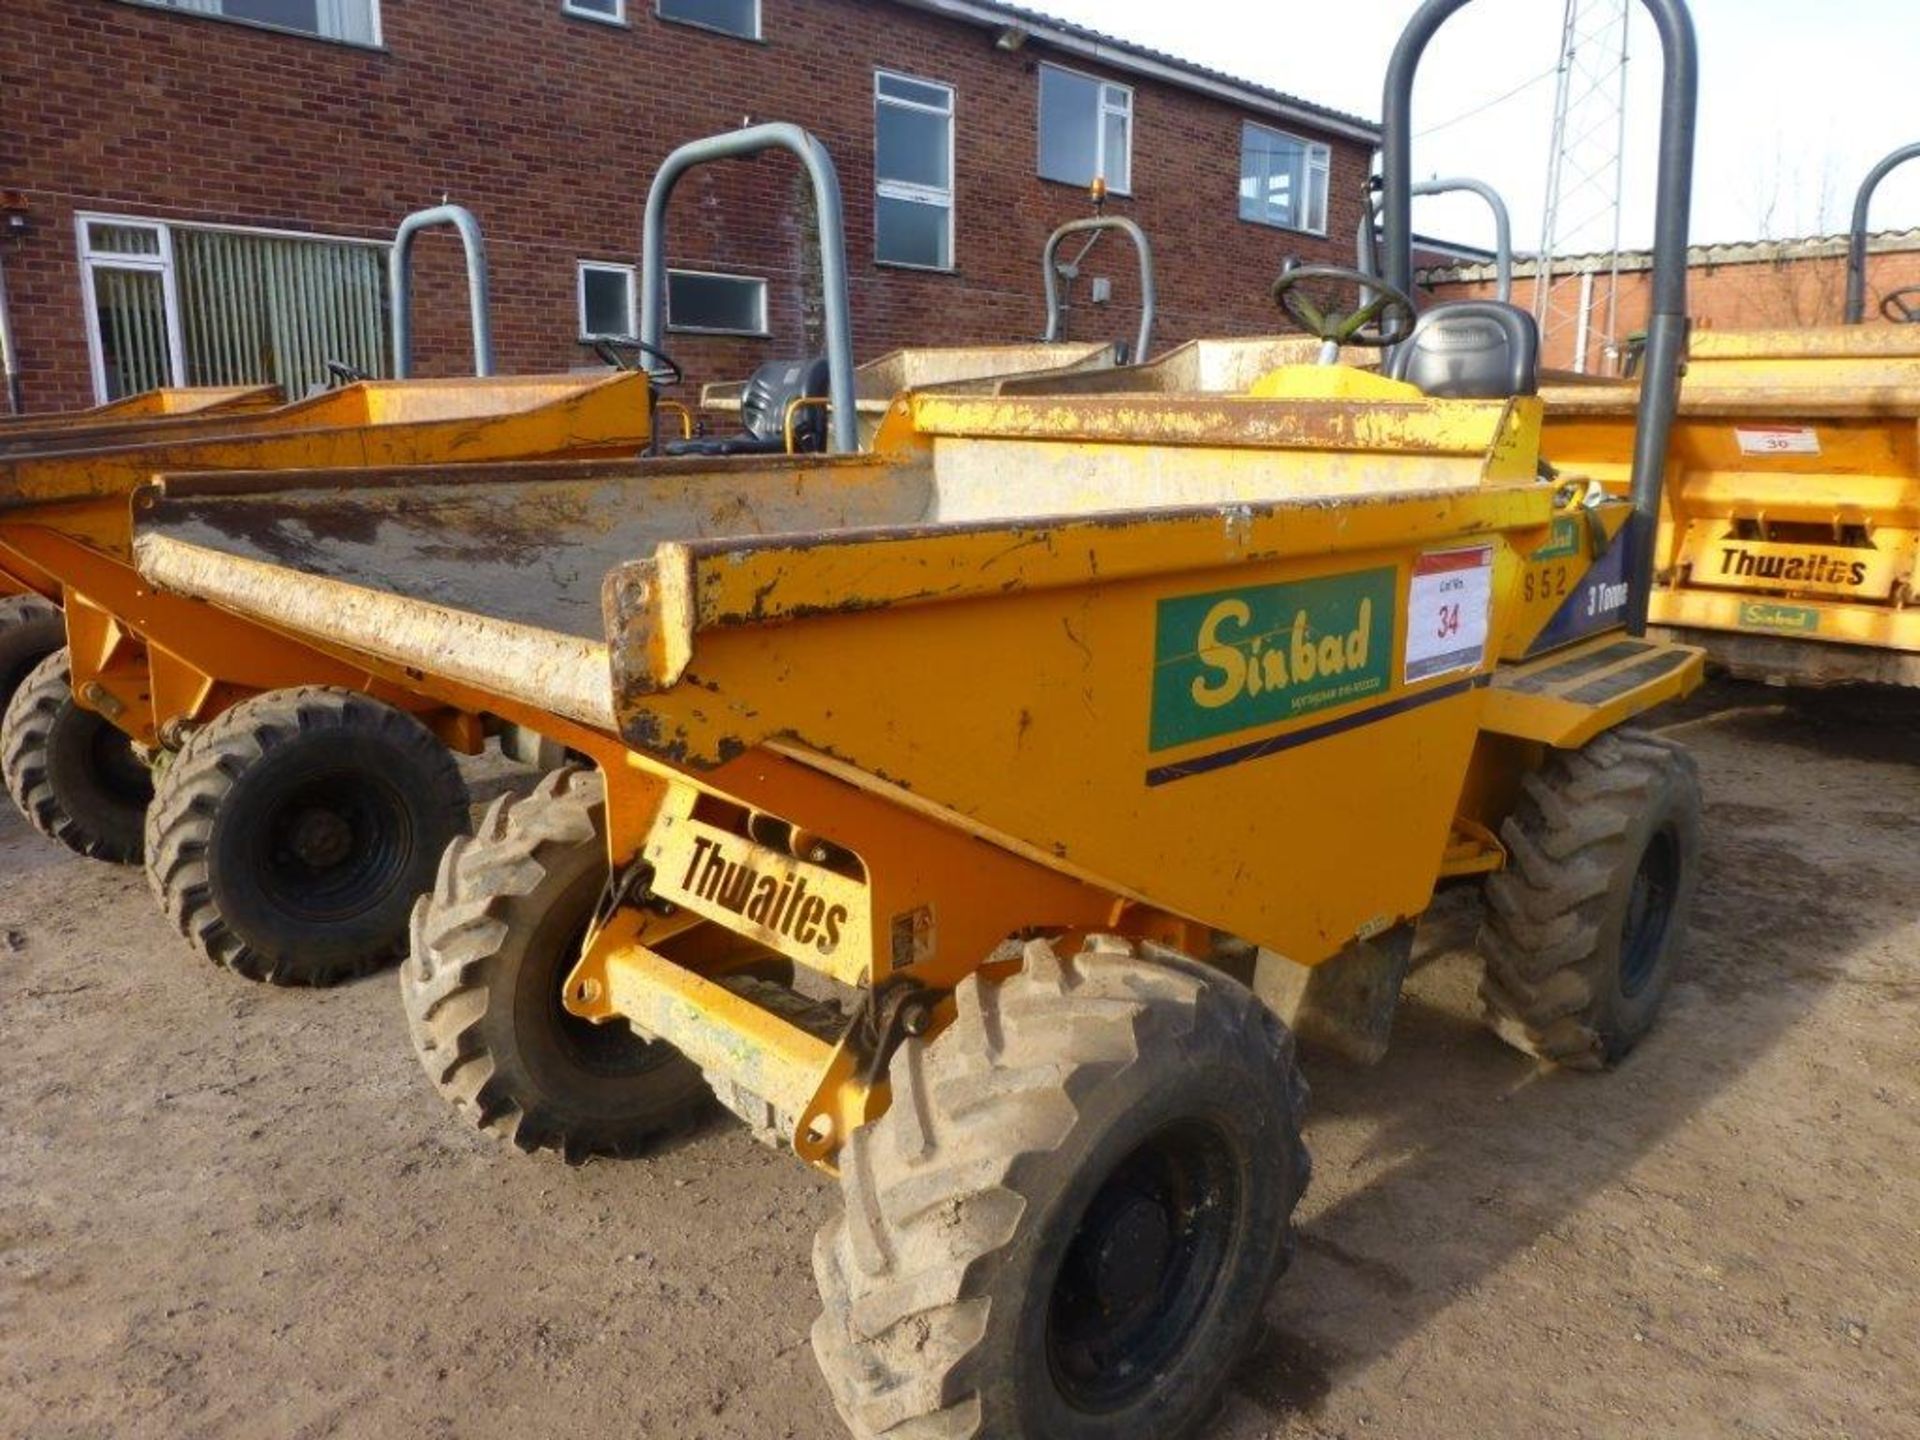 Thwaites 3-tonne articulated dumper (2007), indicated hours 777.9, weight 2010Kg, VIN no.